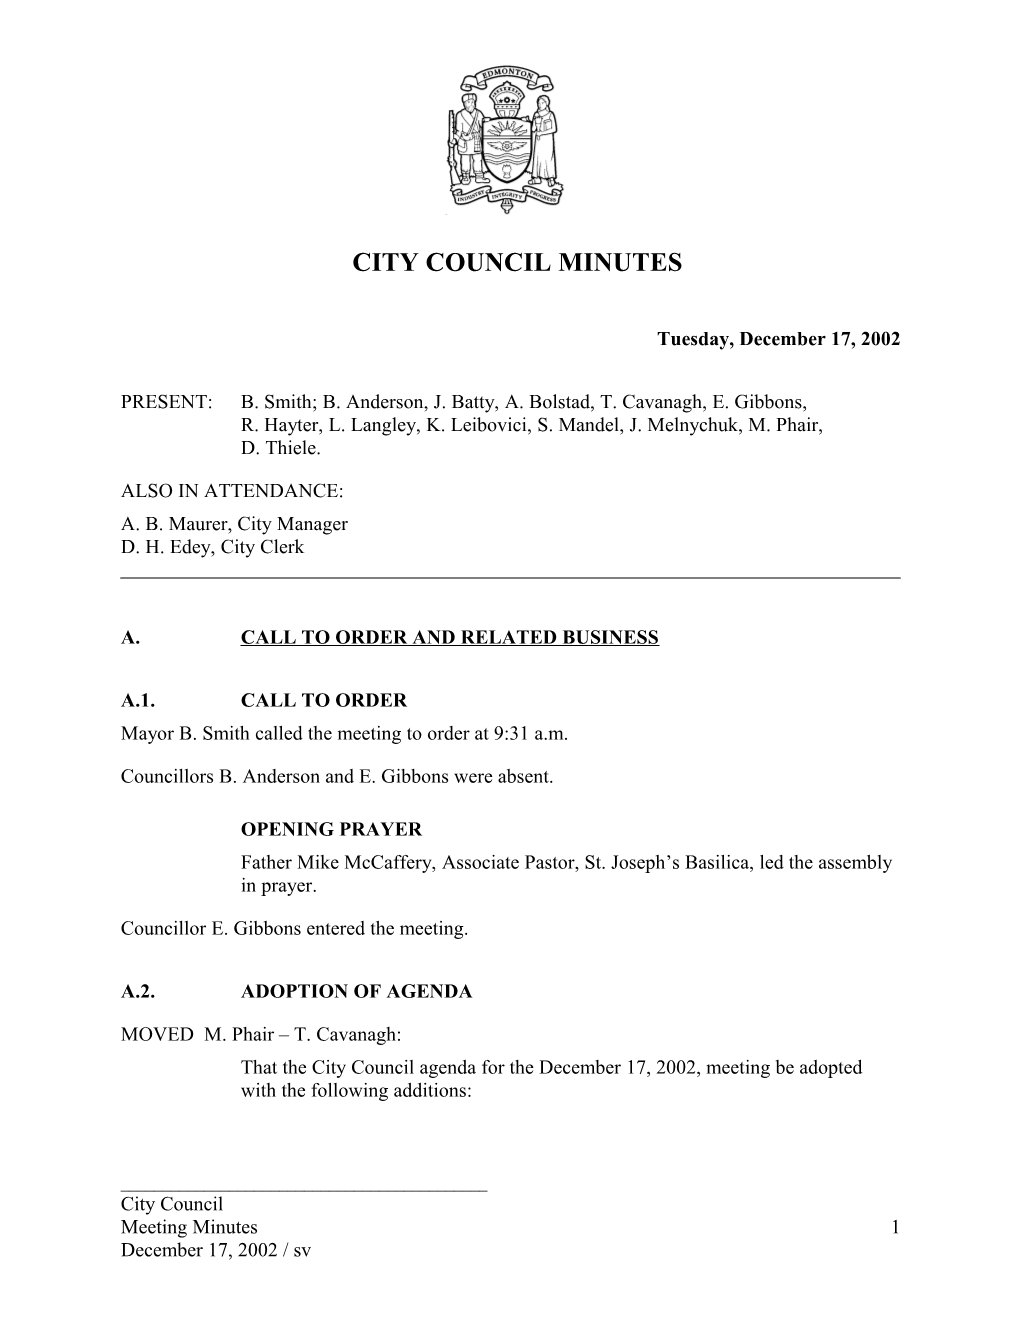 Minutes for City Council December 17, 2002 Meeting